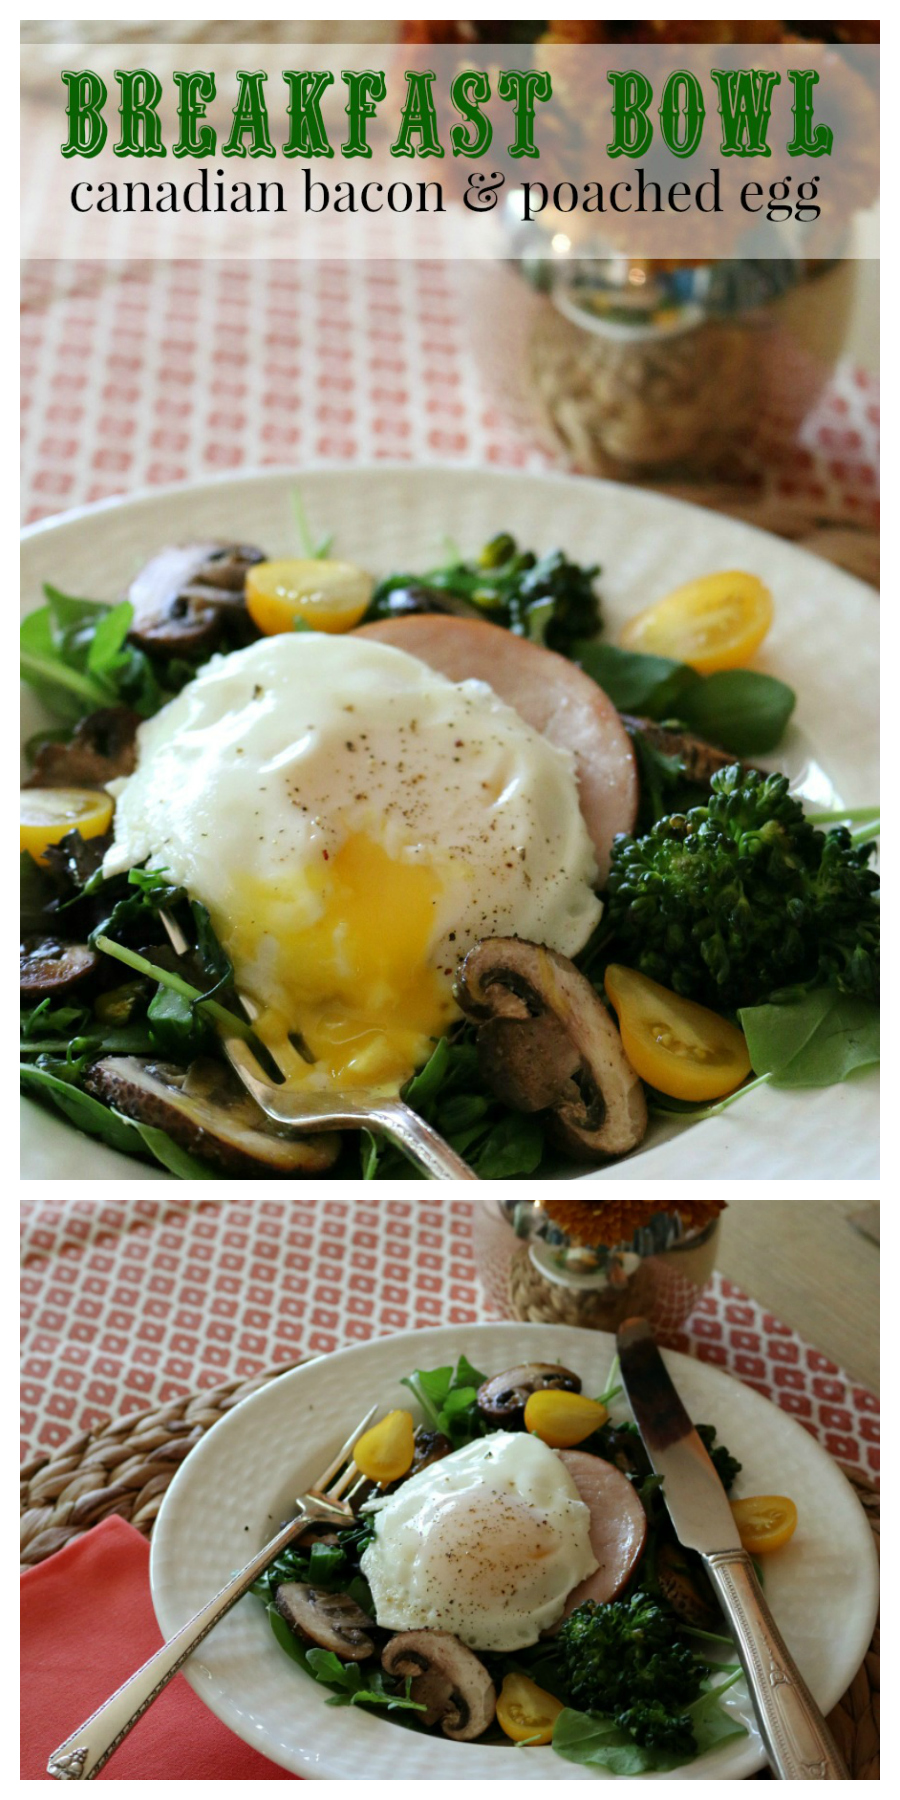 Breakfast Bowl with Canadian Bacon and topped with a Poached Egg CeceliasGoodStuff.com | Good Food for Good People